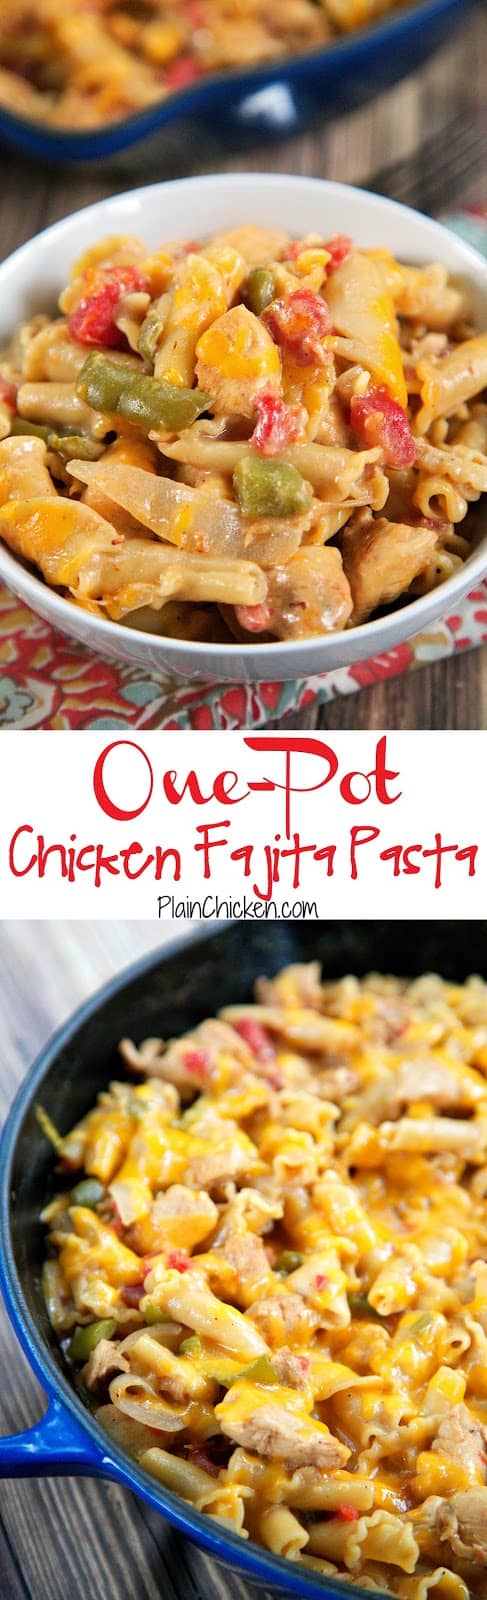 One-Pot Chicken Fajita Pasta Recipe - everything cooks in the same pan, even the pasta! Ready in under 20 minutes!! Chicken, onions, peppers, Rotel, fajita seasoning, chicken broth, cream, pasta, sour cream and cheese. Everyone gobbled this up! Quick, easy and delicious Mexican meal!